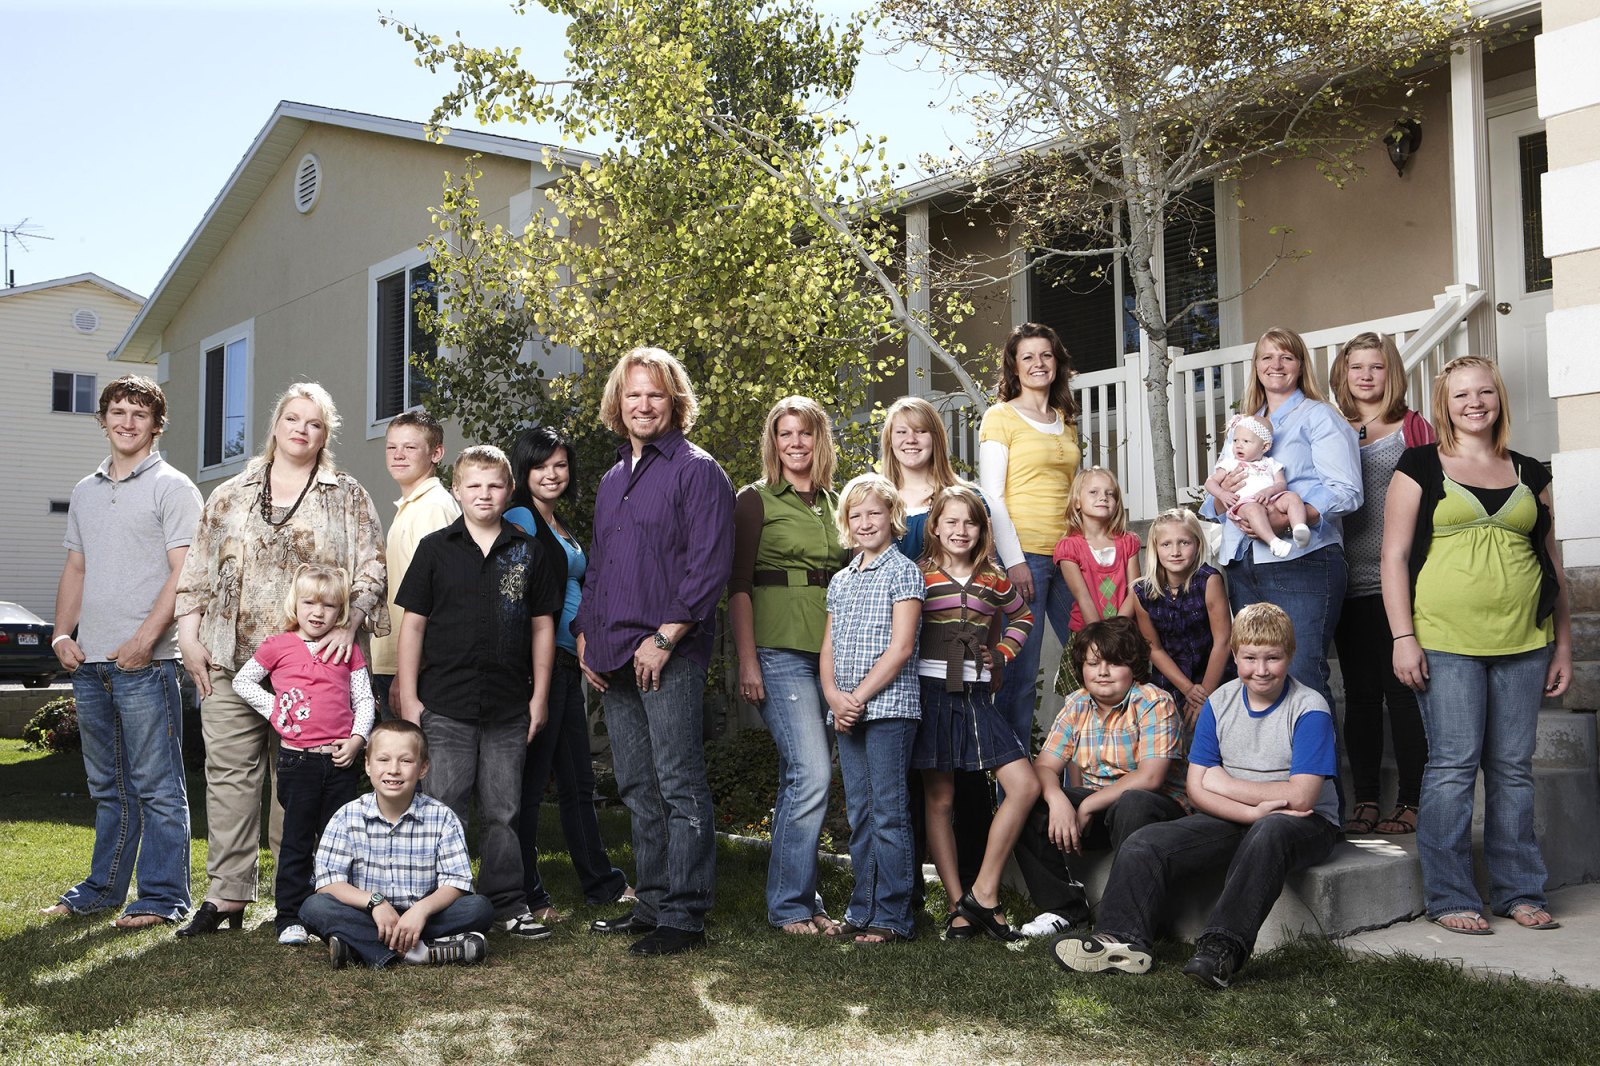 Sister Wives' Kody Brown's Ups and Downs With His 18 Kids